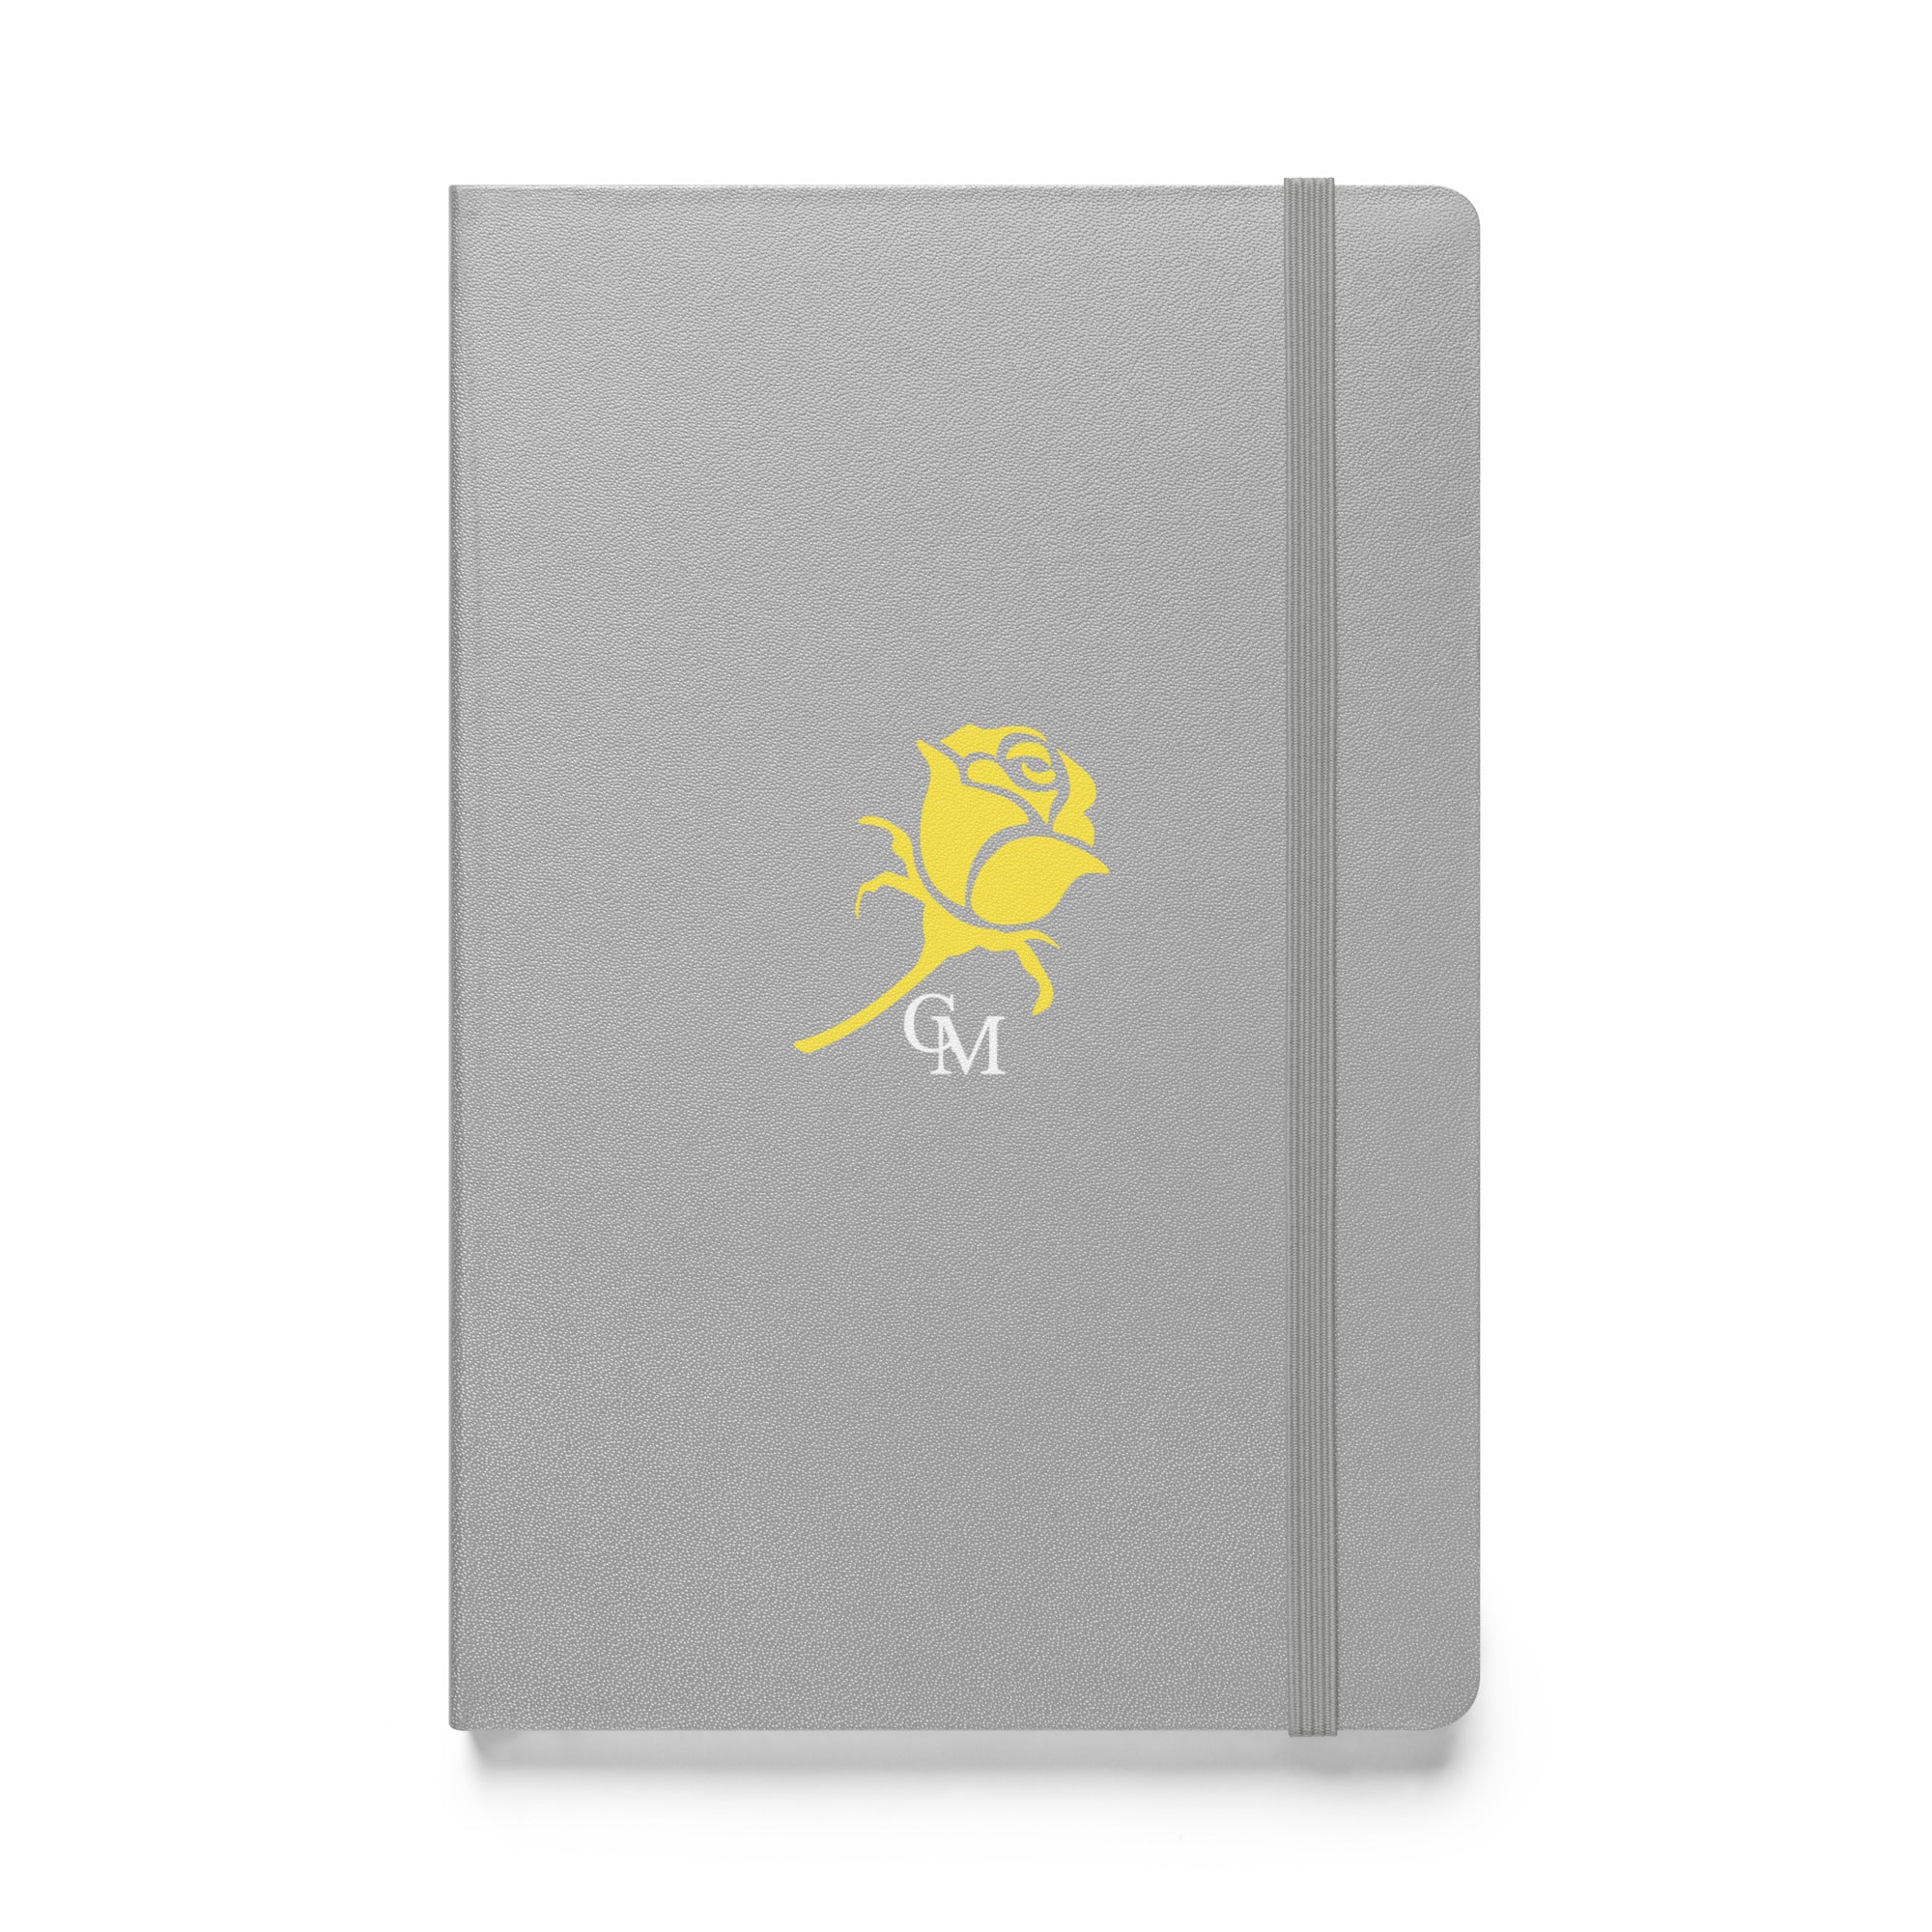 CM Yellow Rose Hardcover bound journal/notebook